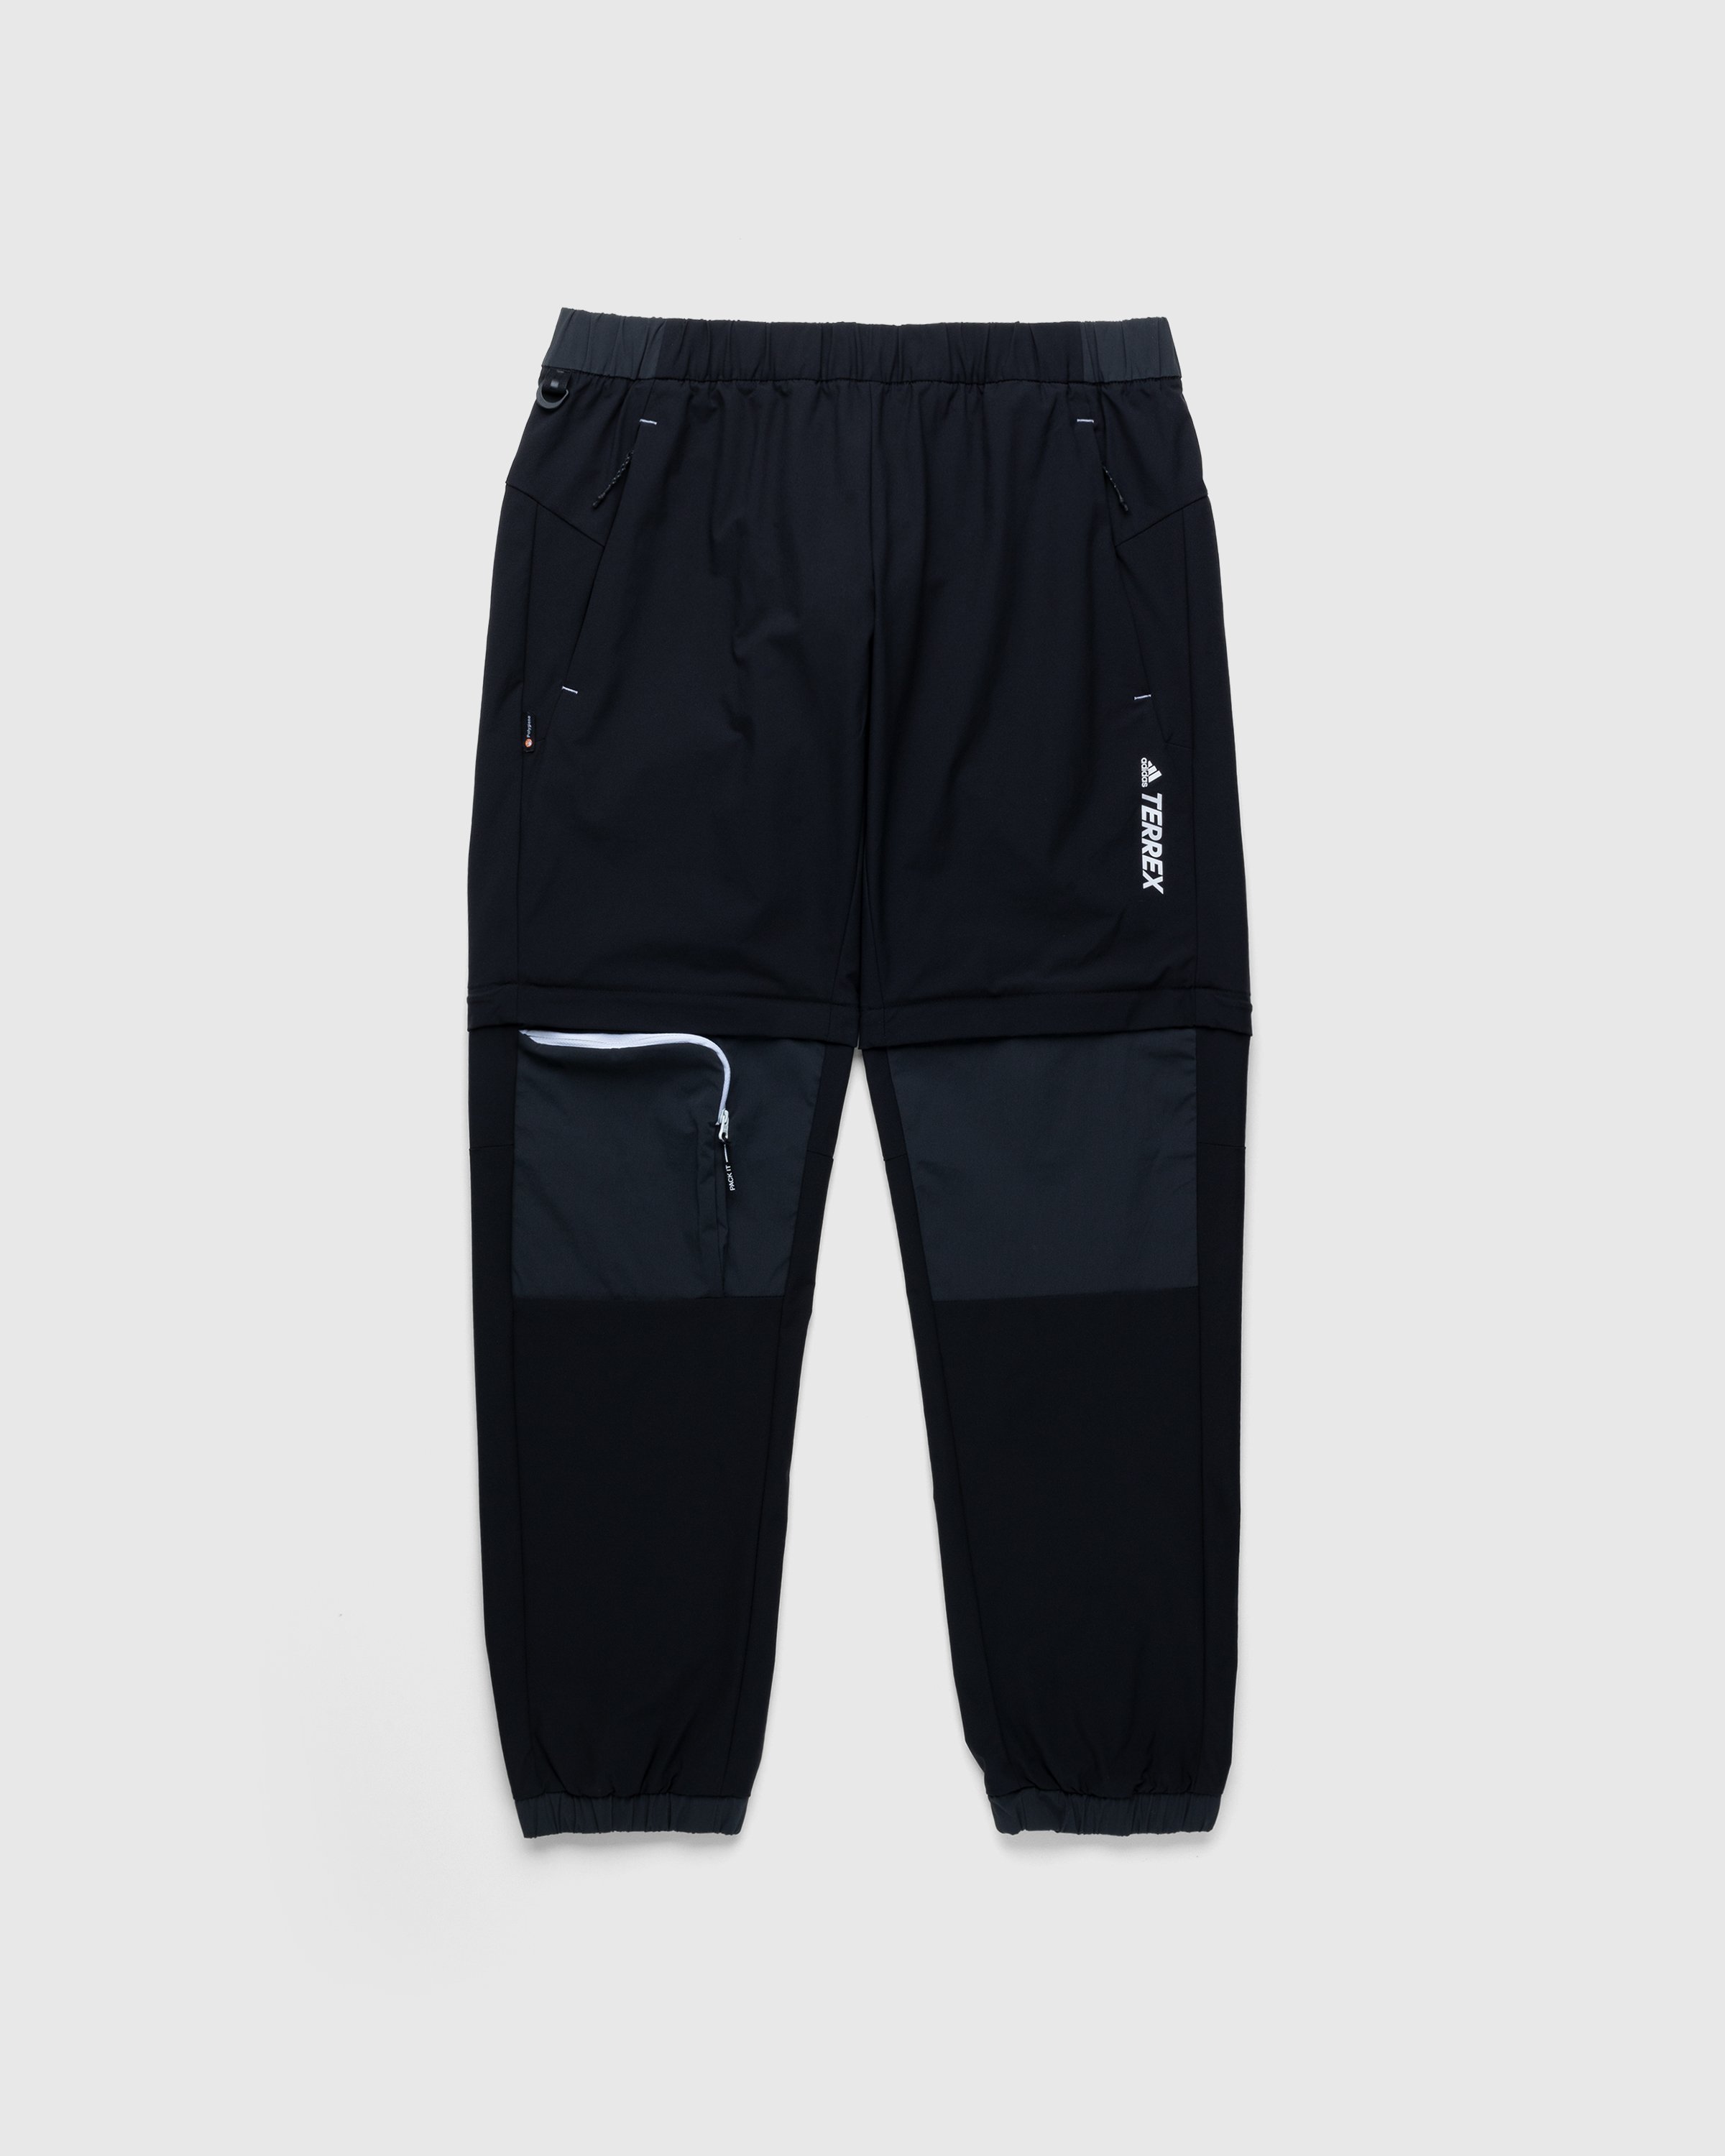 Buy Pima French Terry Women's Pants Carbon Black Online